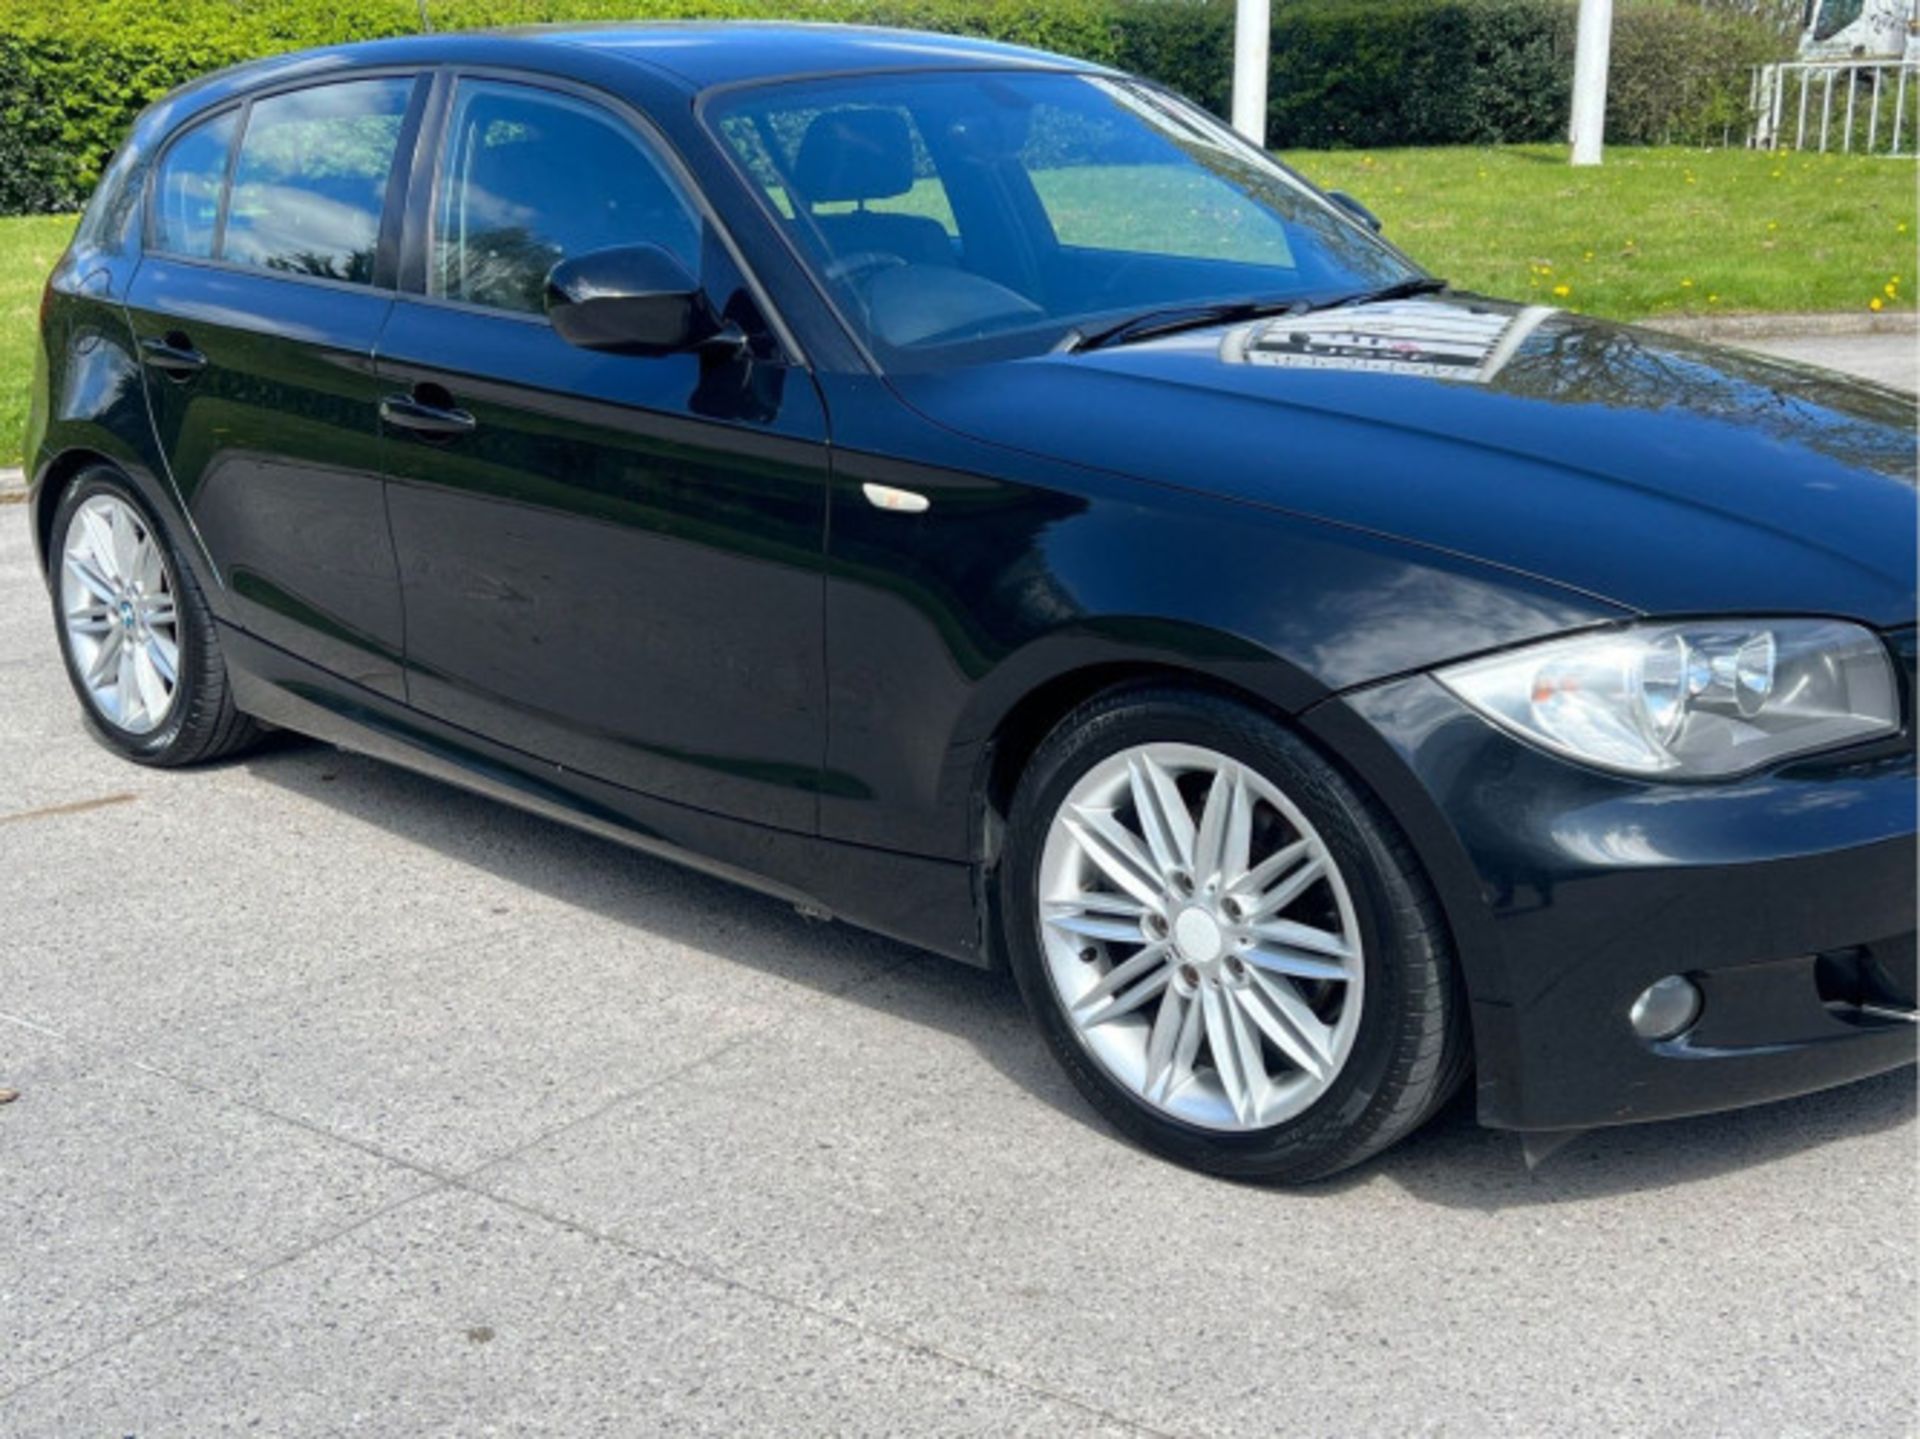 BMW 1 SERIES 2.0 118D M SPORT EURO 5 5DR (2010) - Image 54 of 58